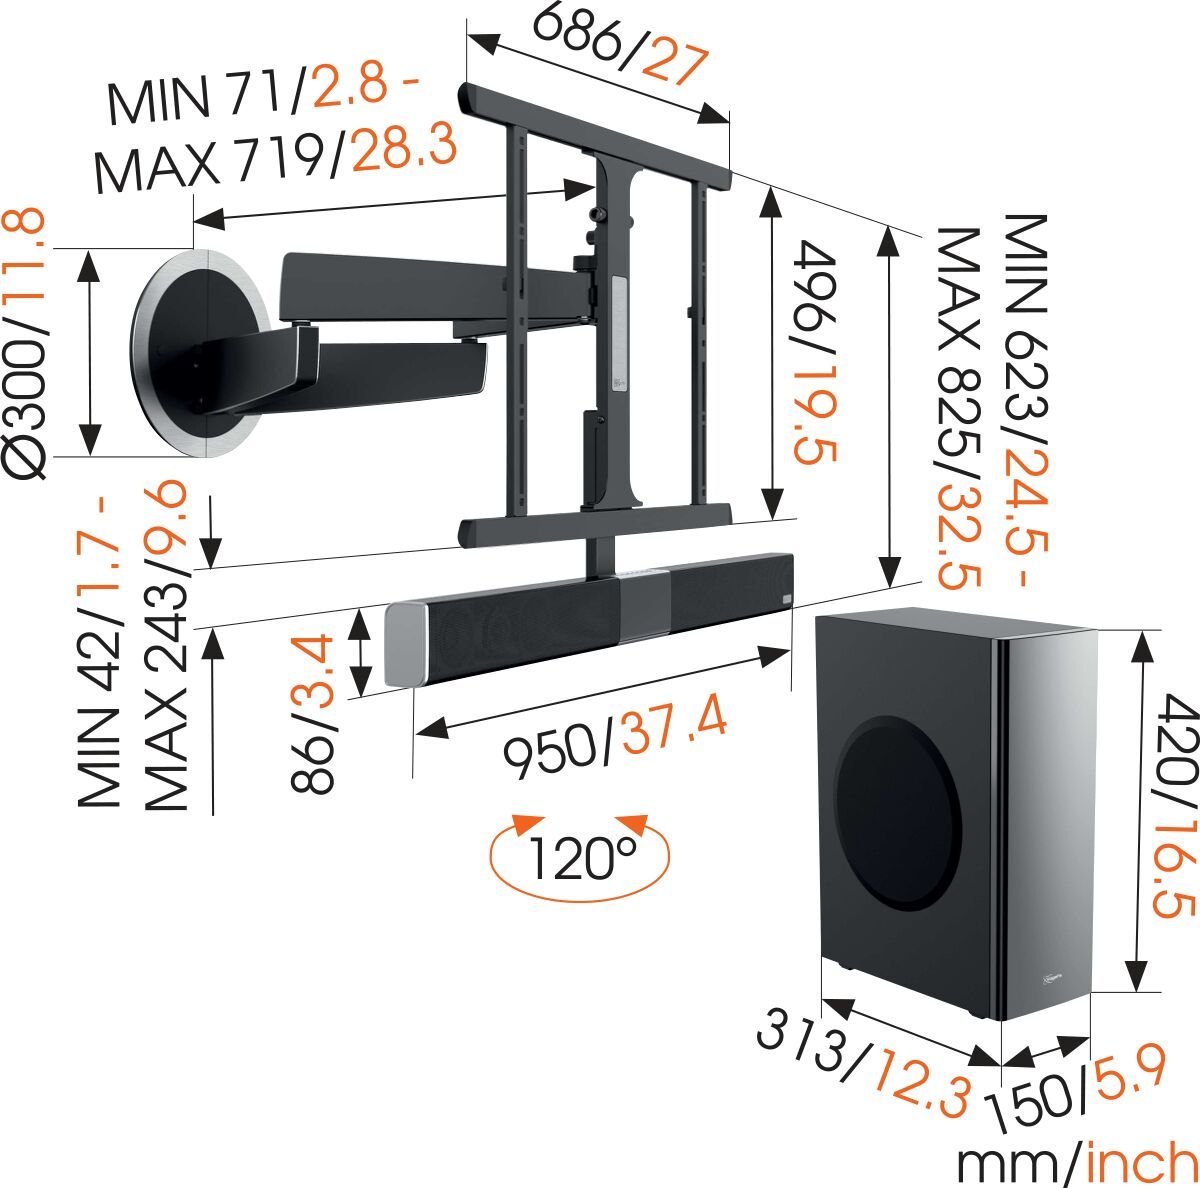 Vogel's MotionSoundMount (NEXT 8375) Full-Motion Motorised TV Wall Mount with Integrated Sound 40 65 Motion (up to 120°) Dimensions